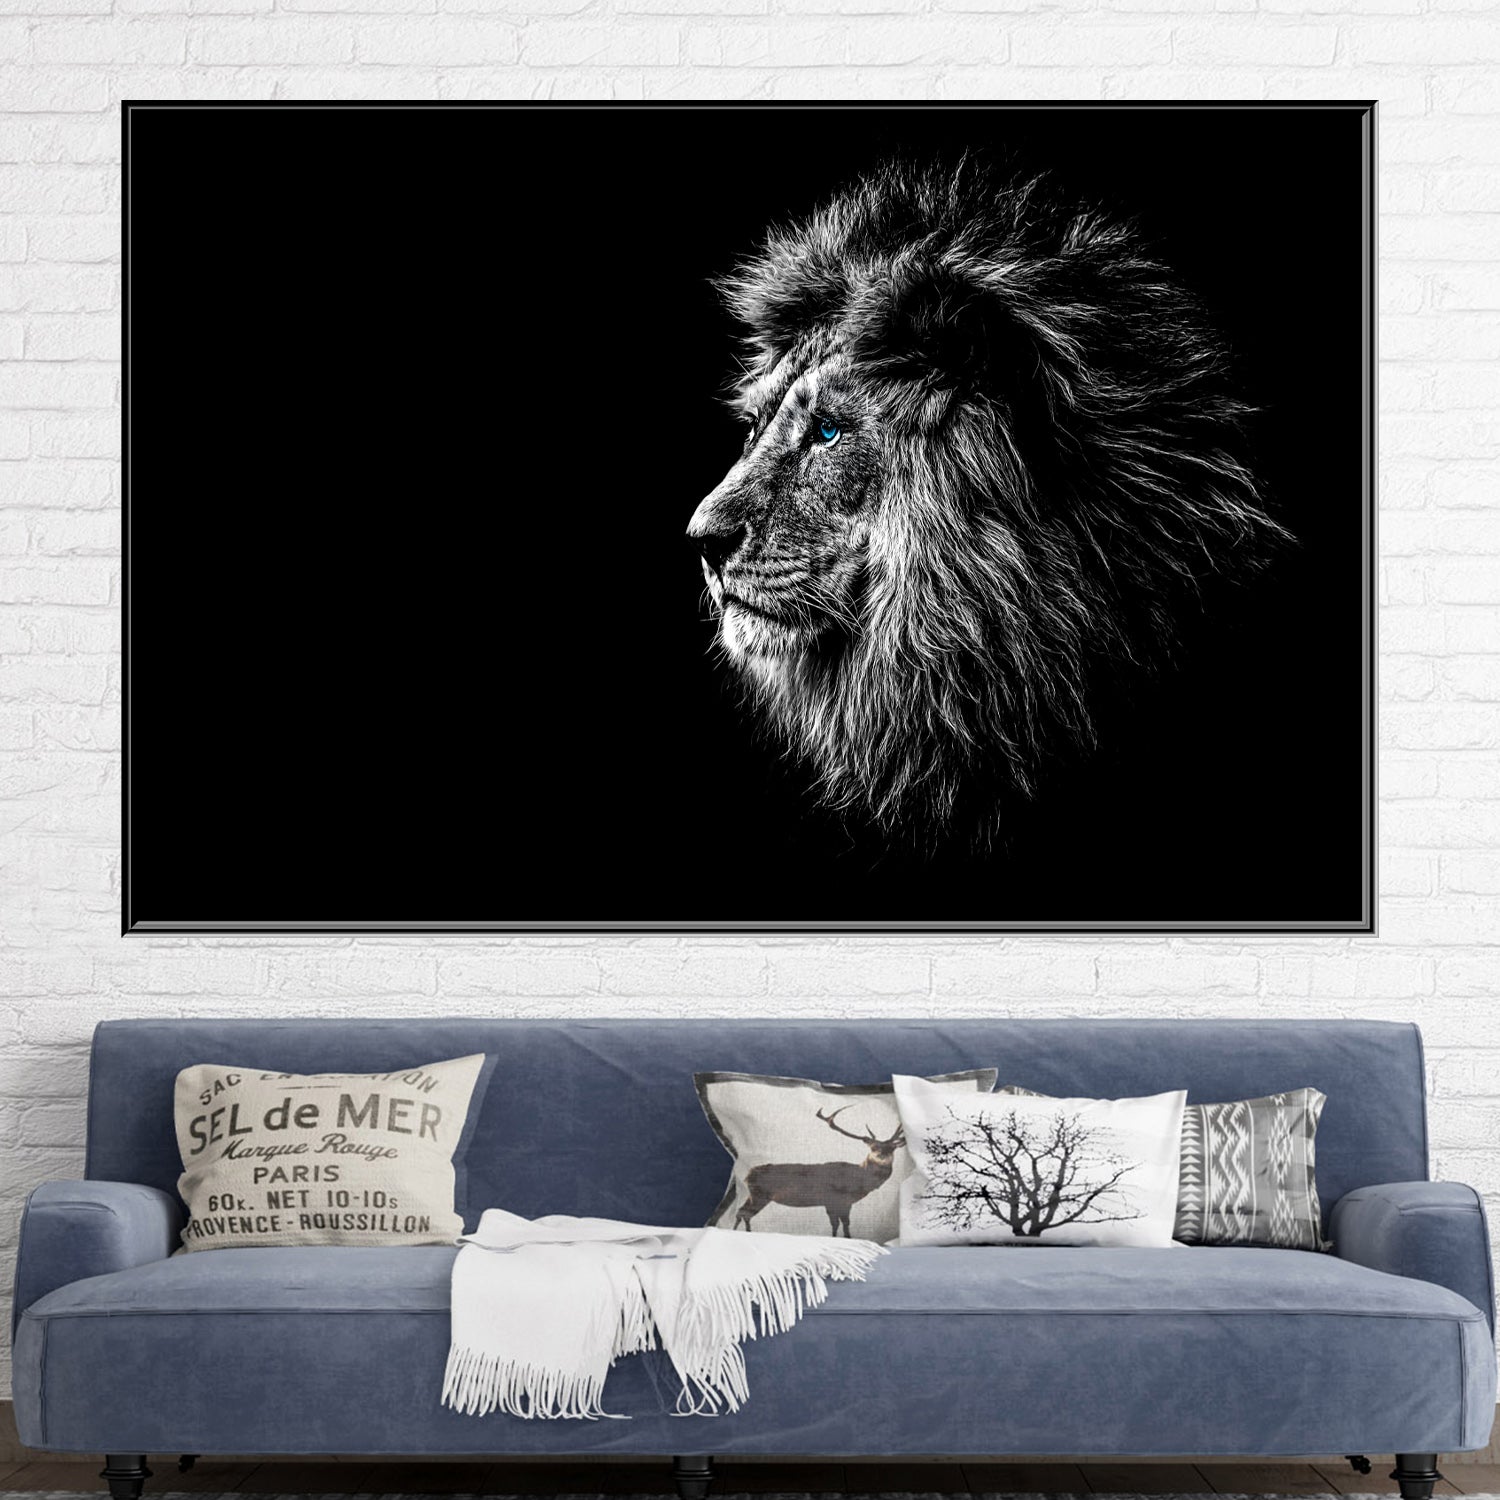 https://cdn.shopify.com/s/files/1/0387/9986/8044/products/MajesticLionCanvasArtprintStretched-4.jpg